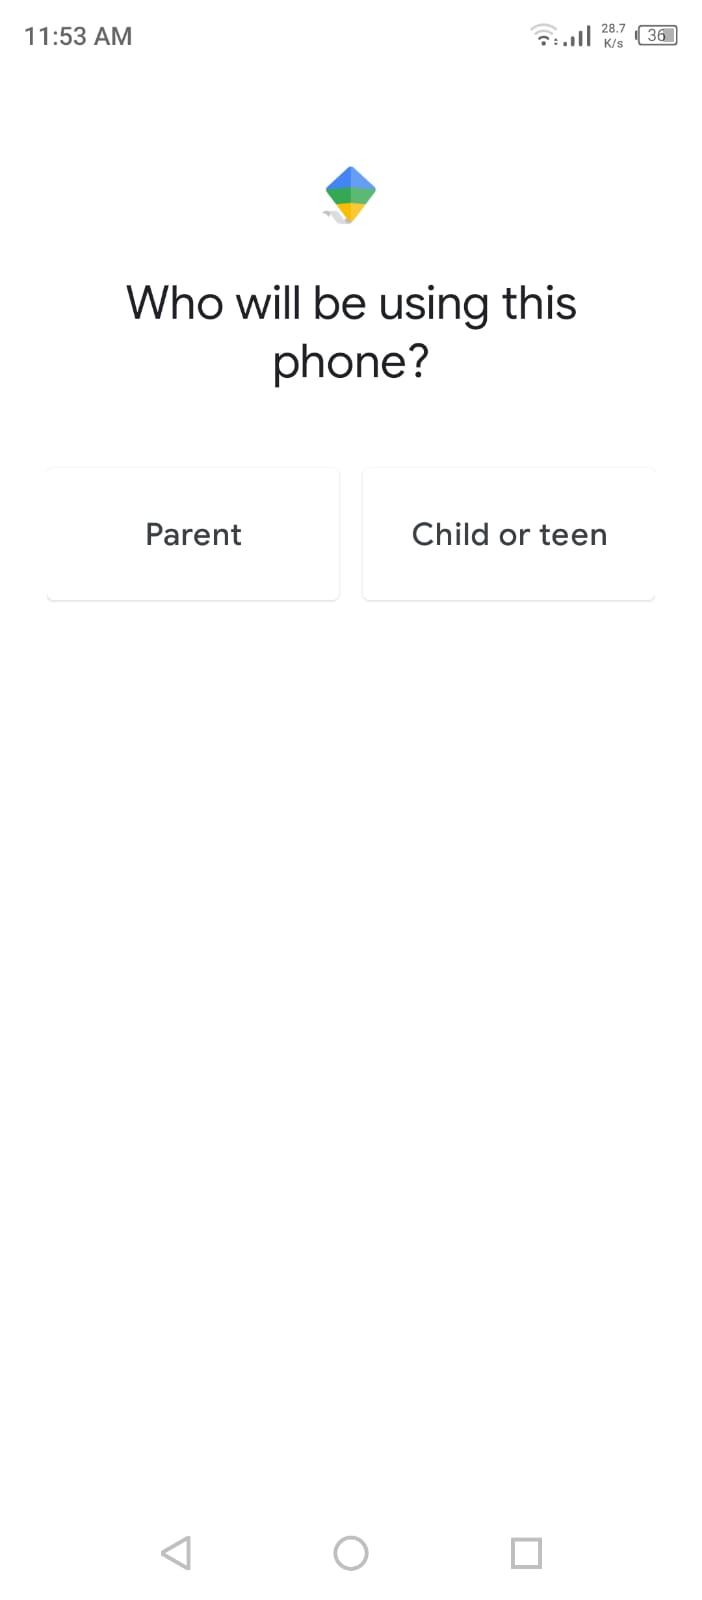 Google Family Link - Choosing between Parent and Child